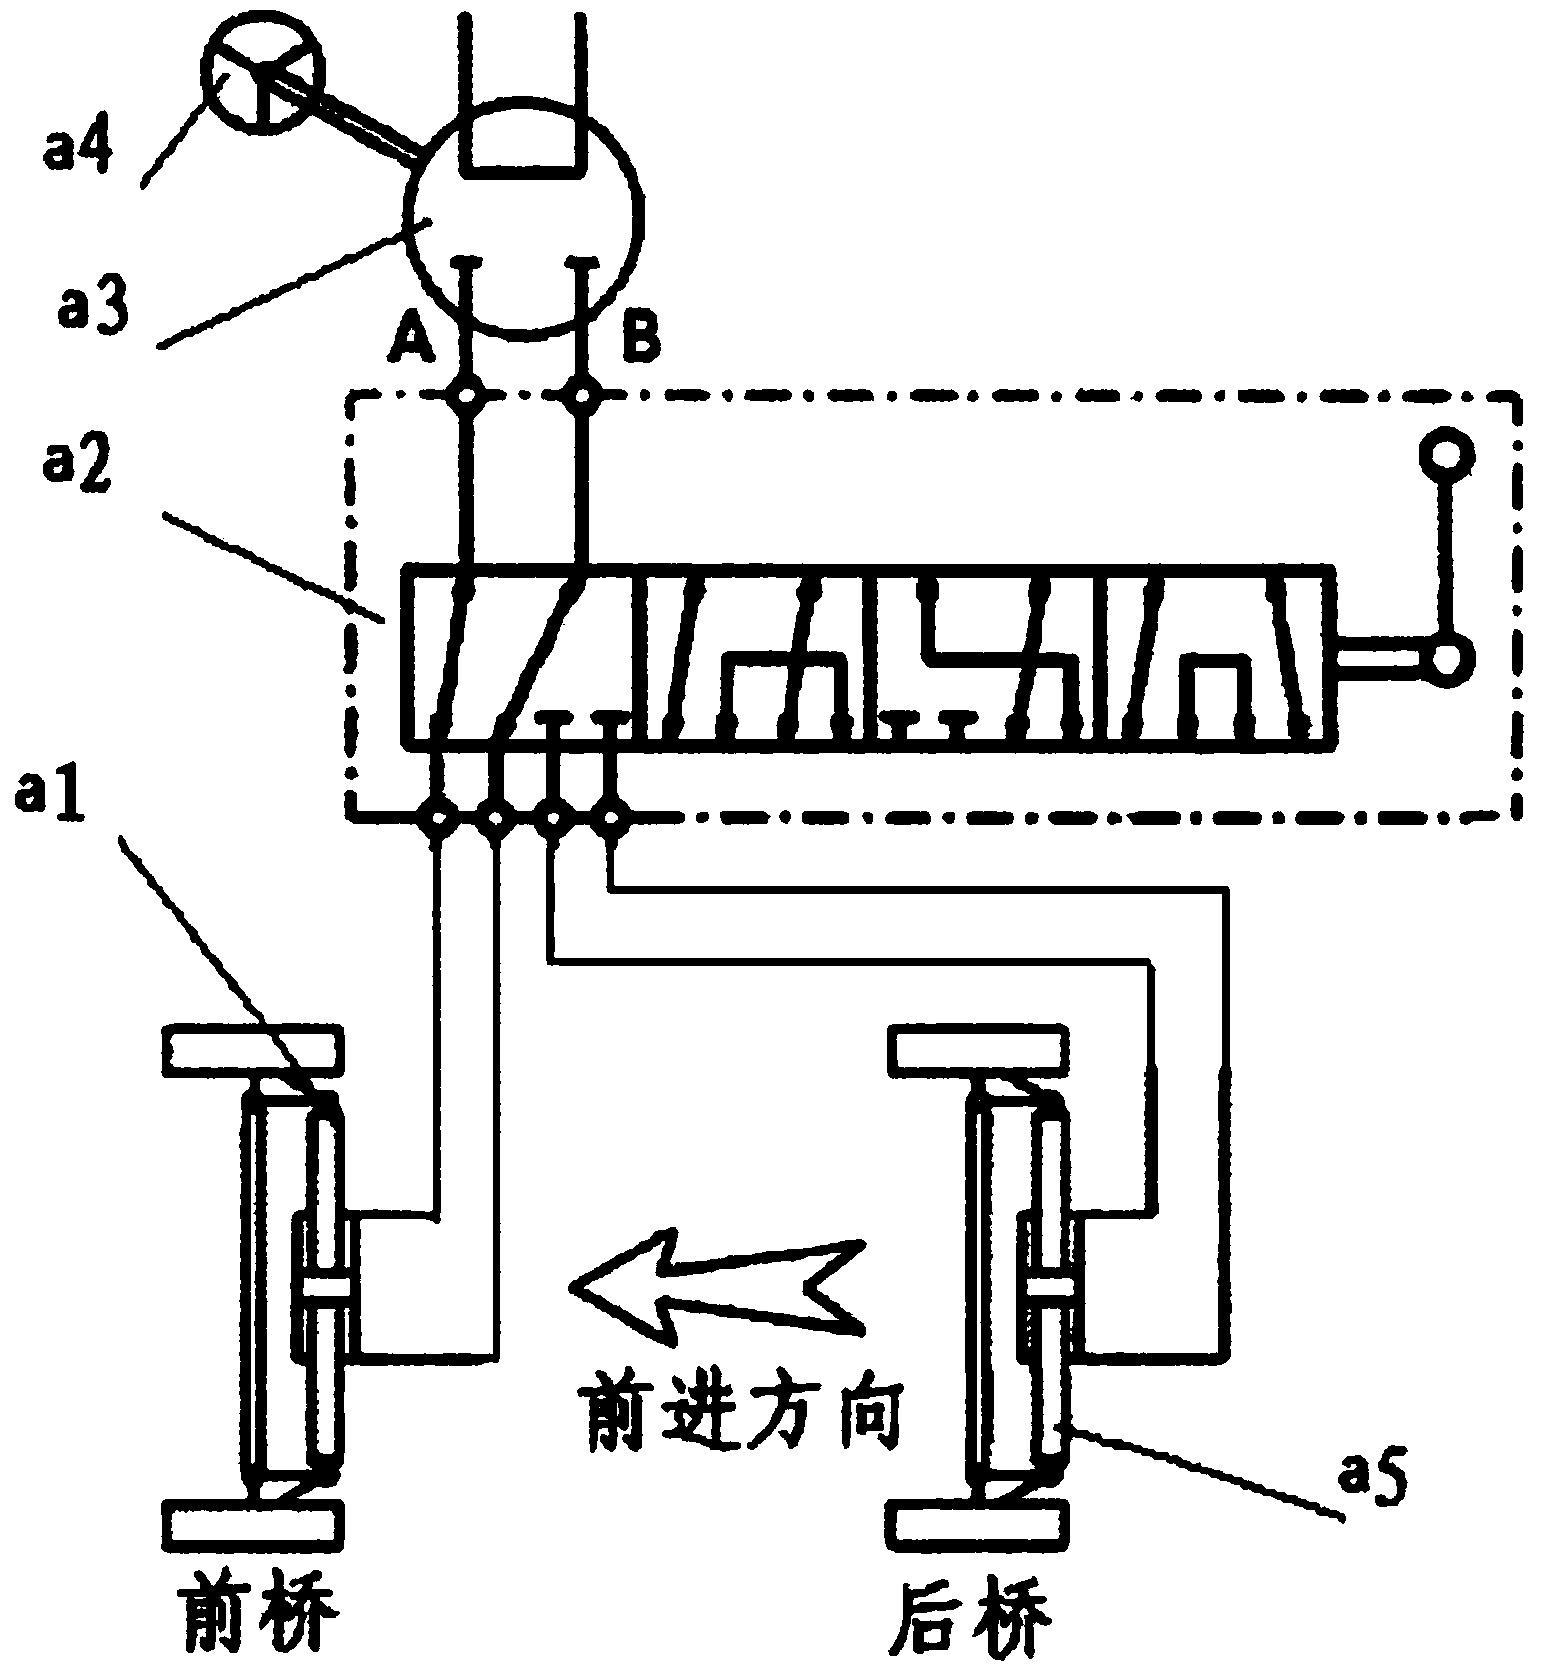 Manually switched multi-mode steering hydraulic control system and wheeled crane